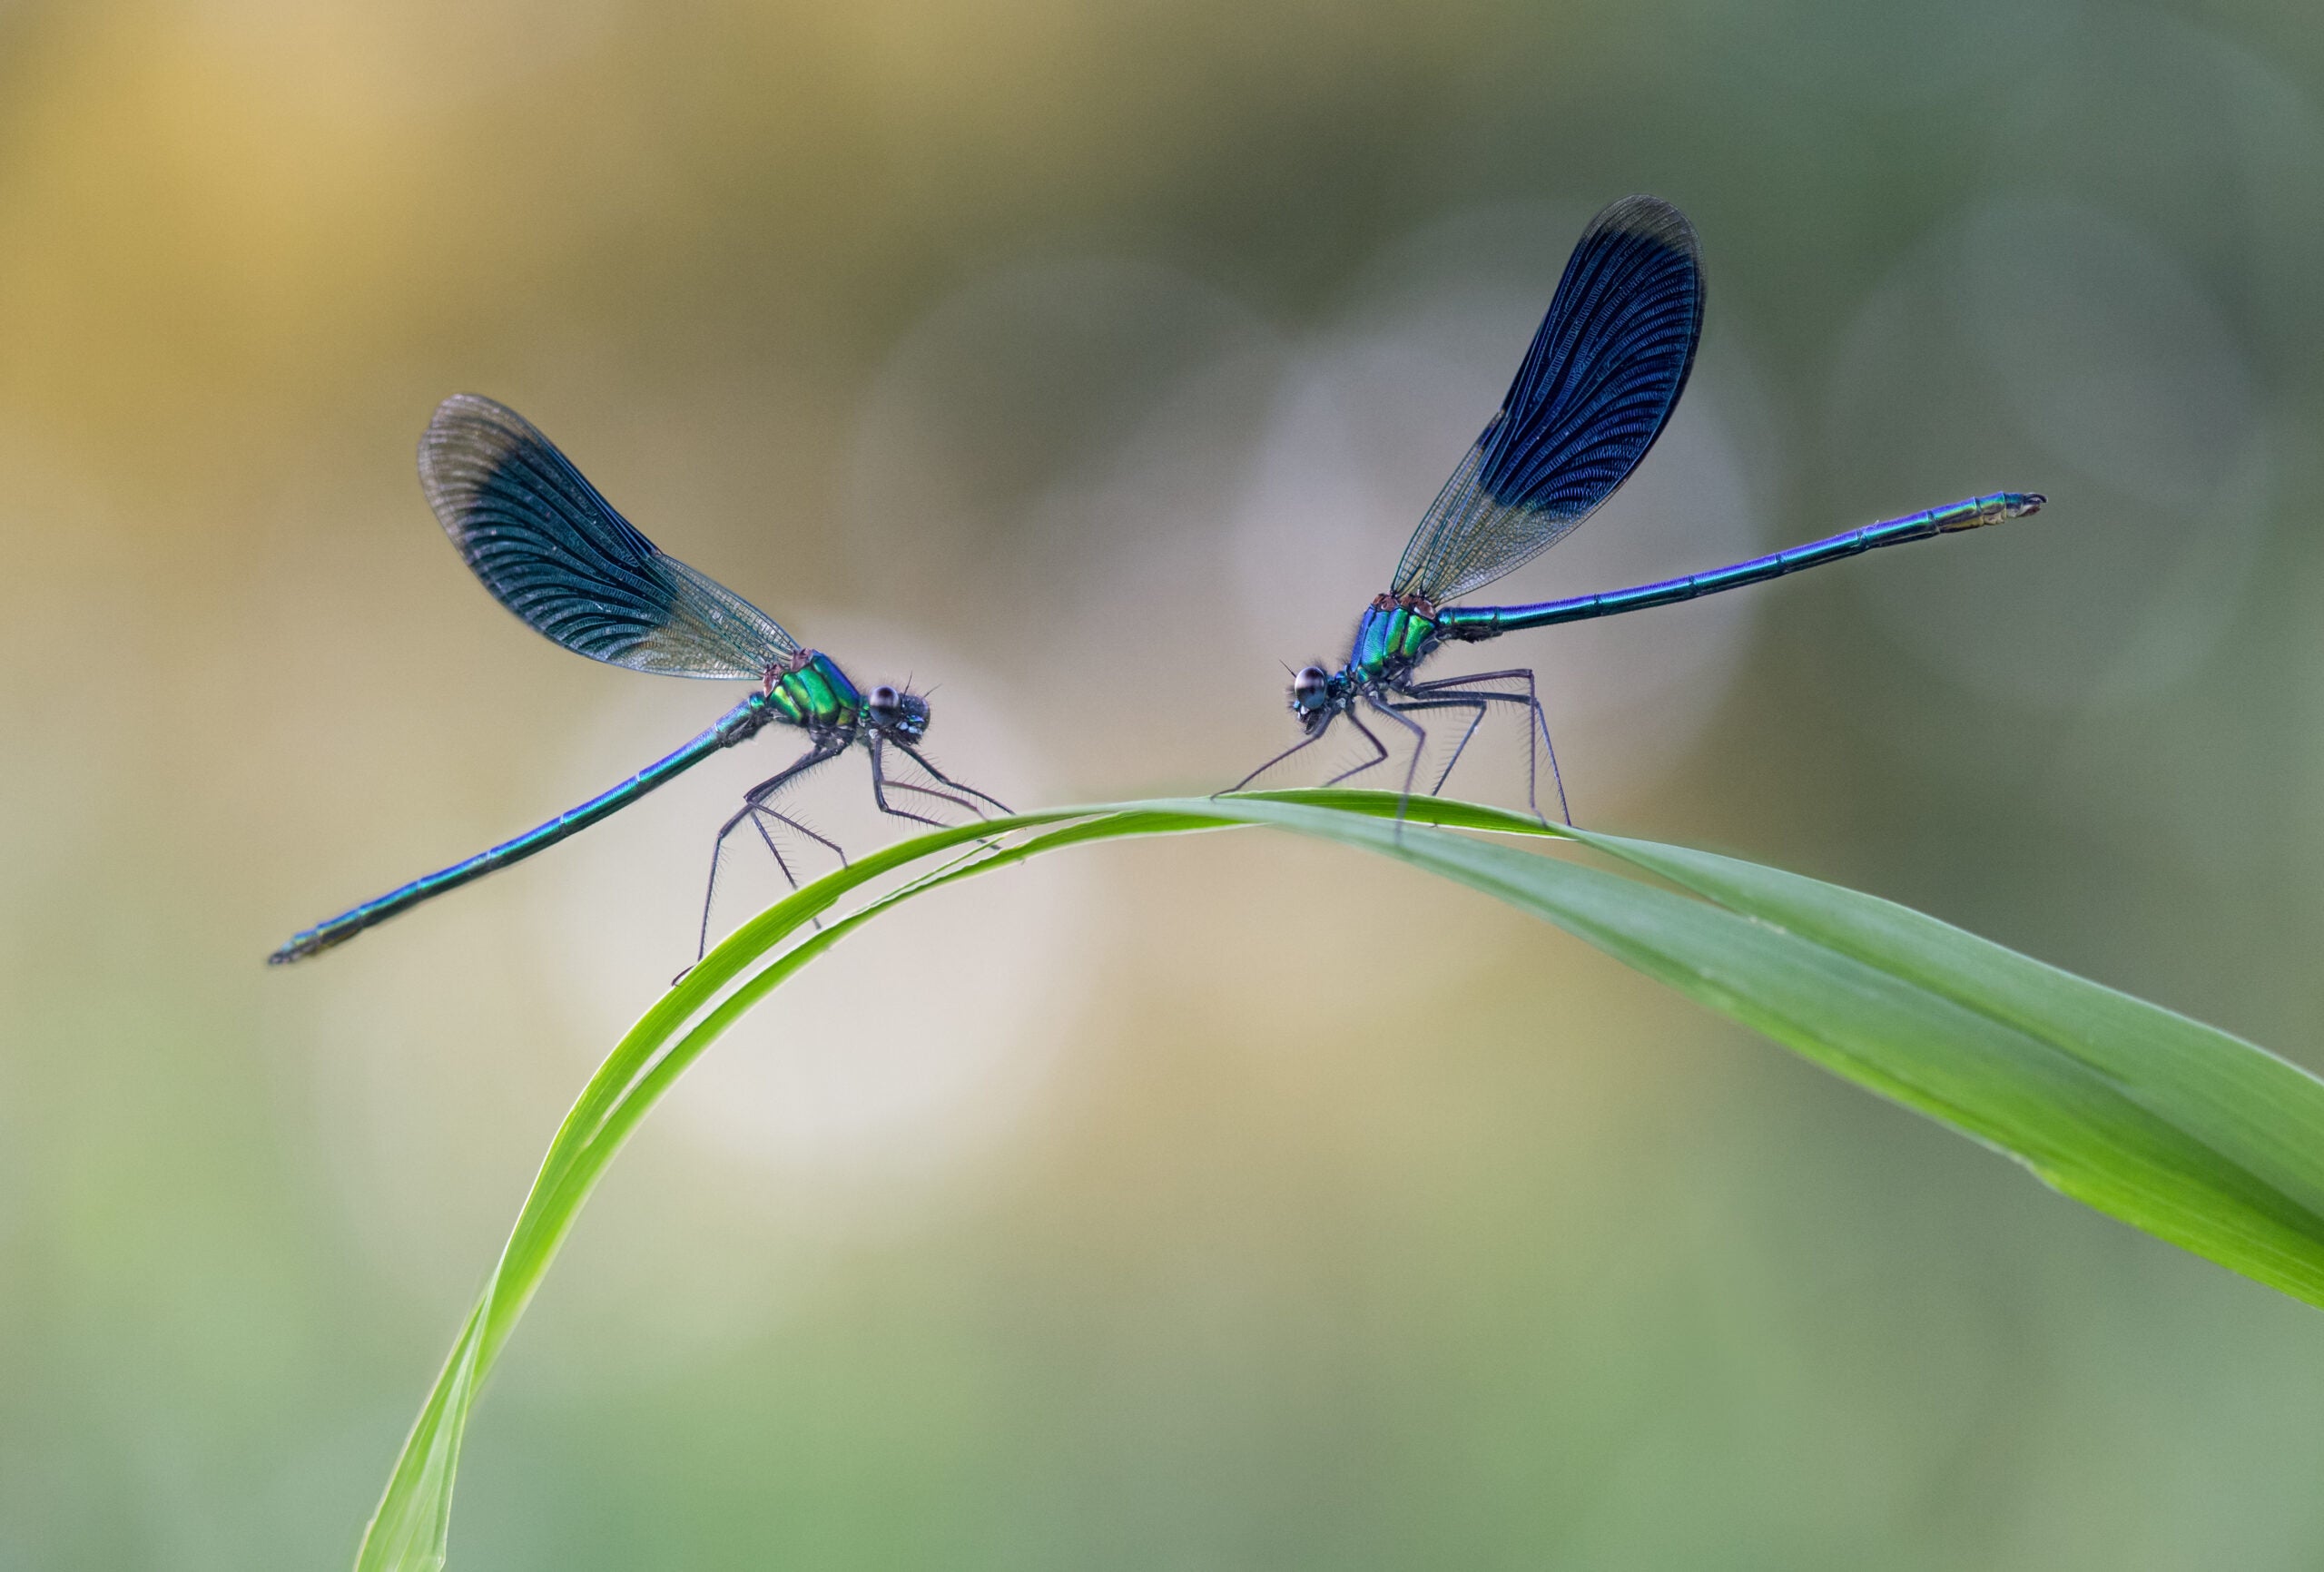 Two dragonflies mirror one another